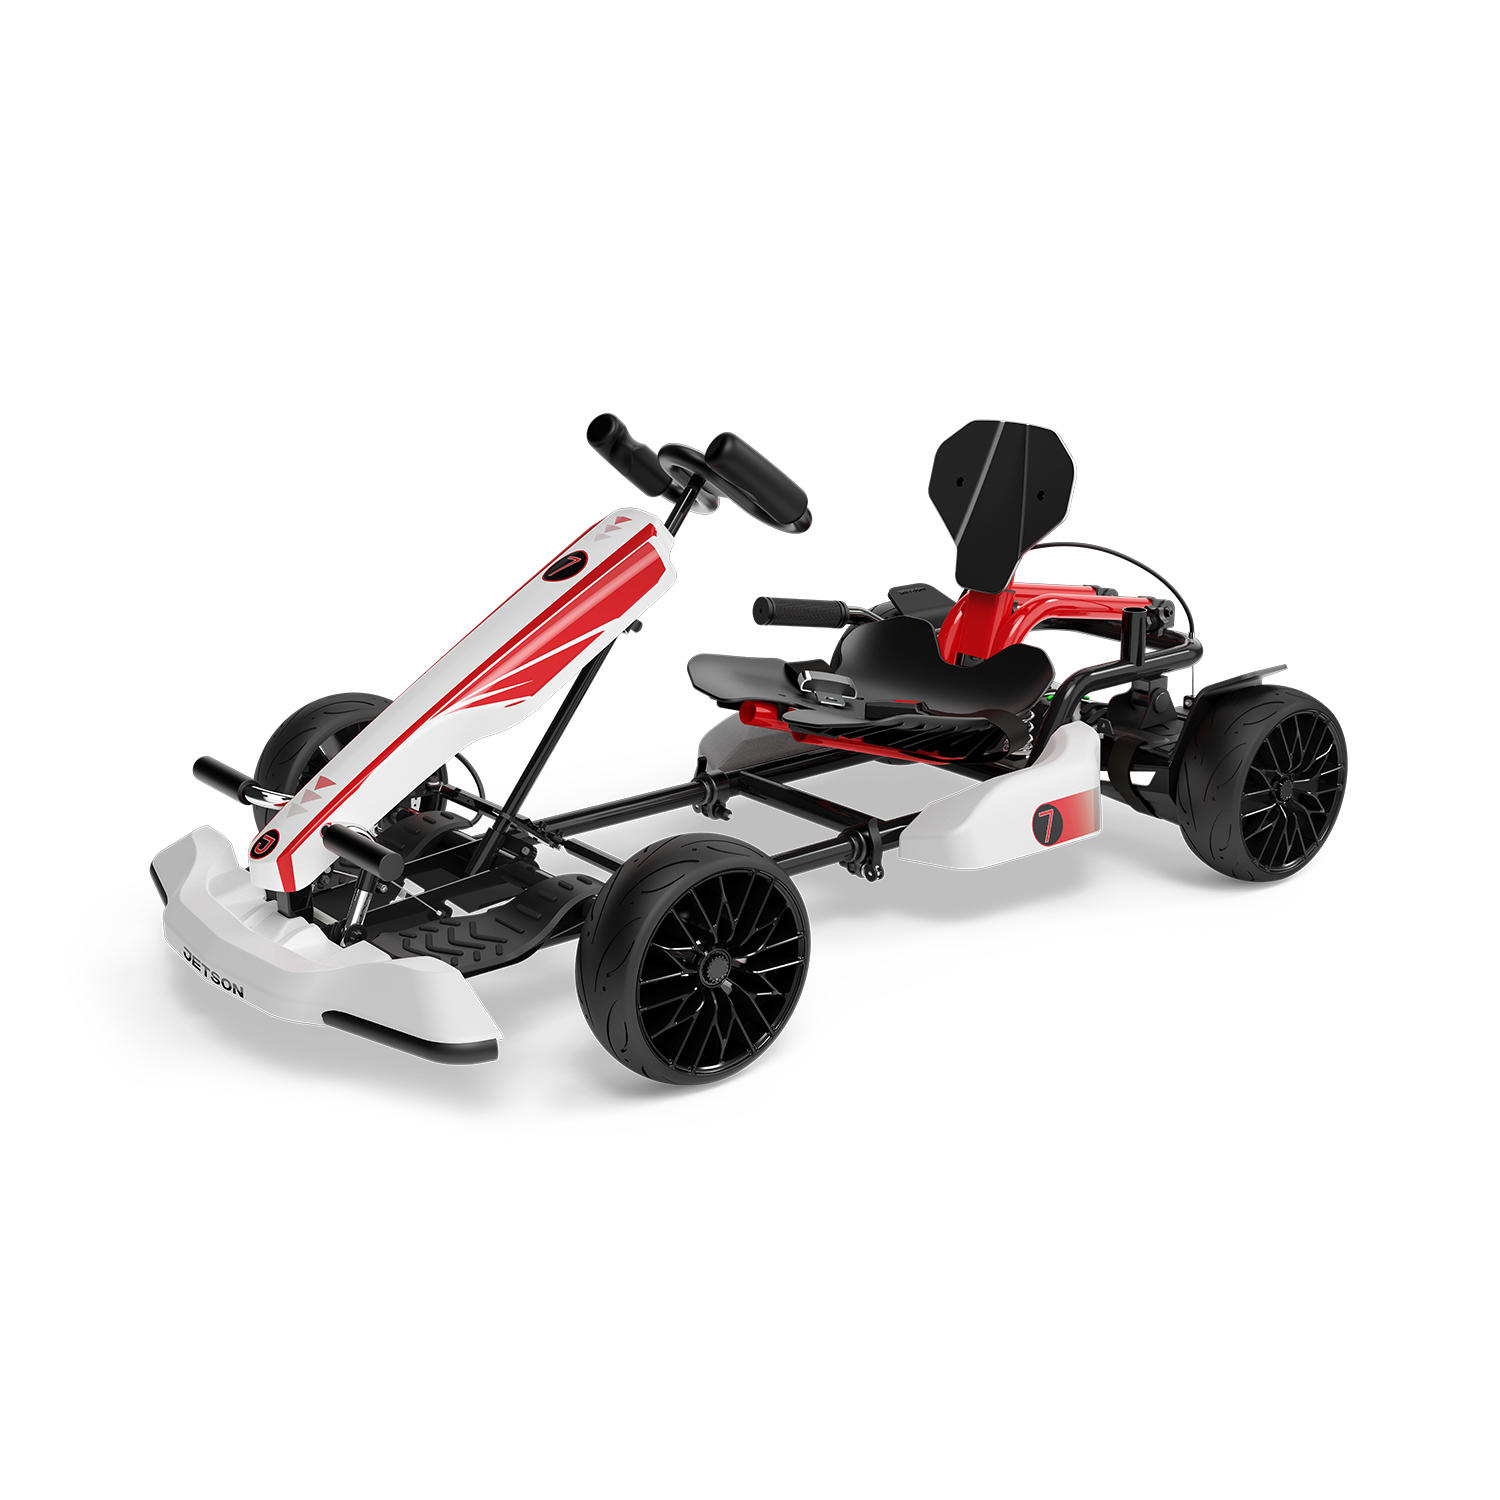 Jetson Condor Extreme Terrain Hoverboard & Race Kart Combo